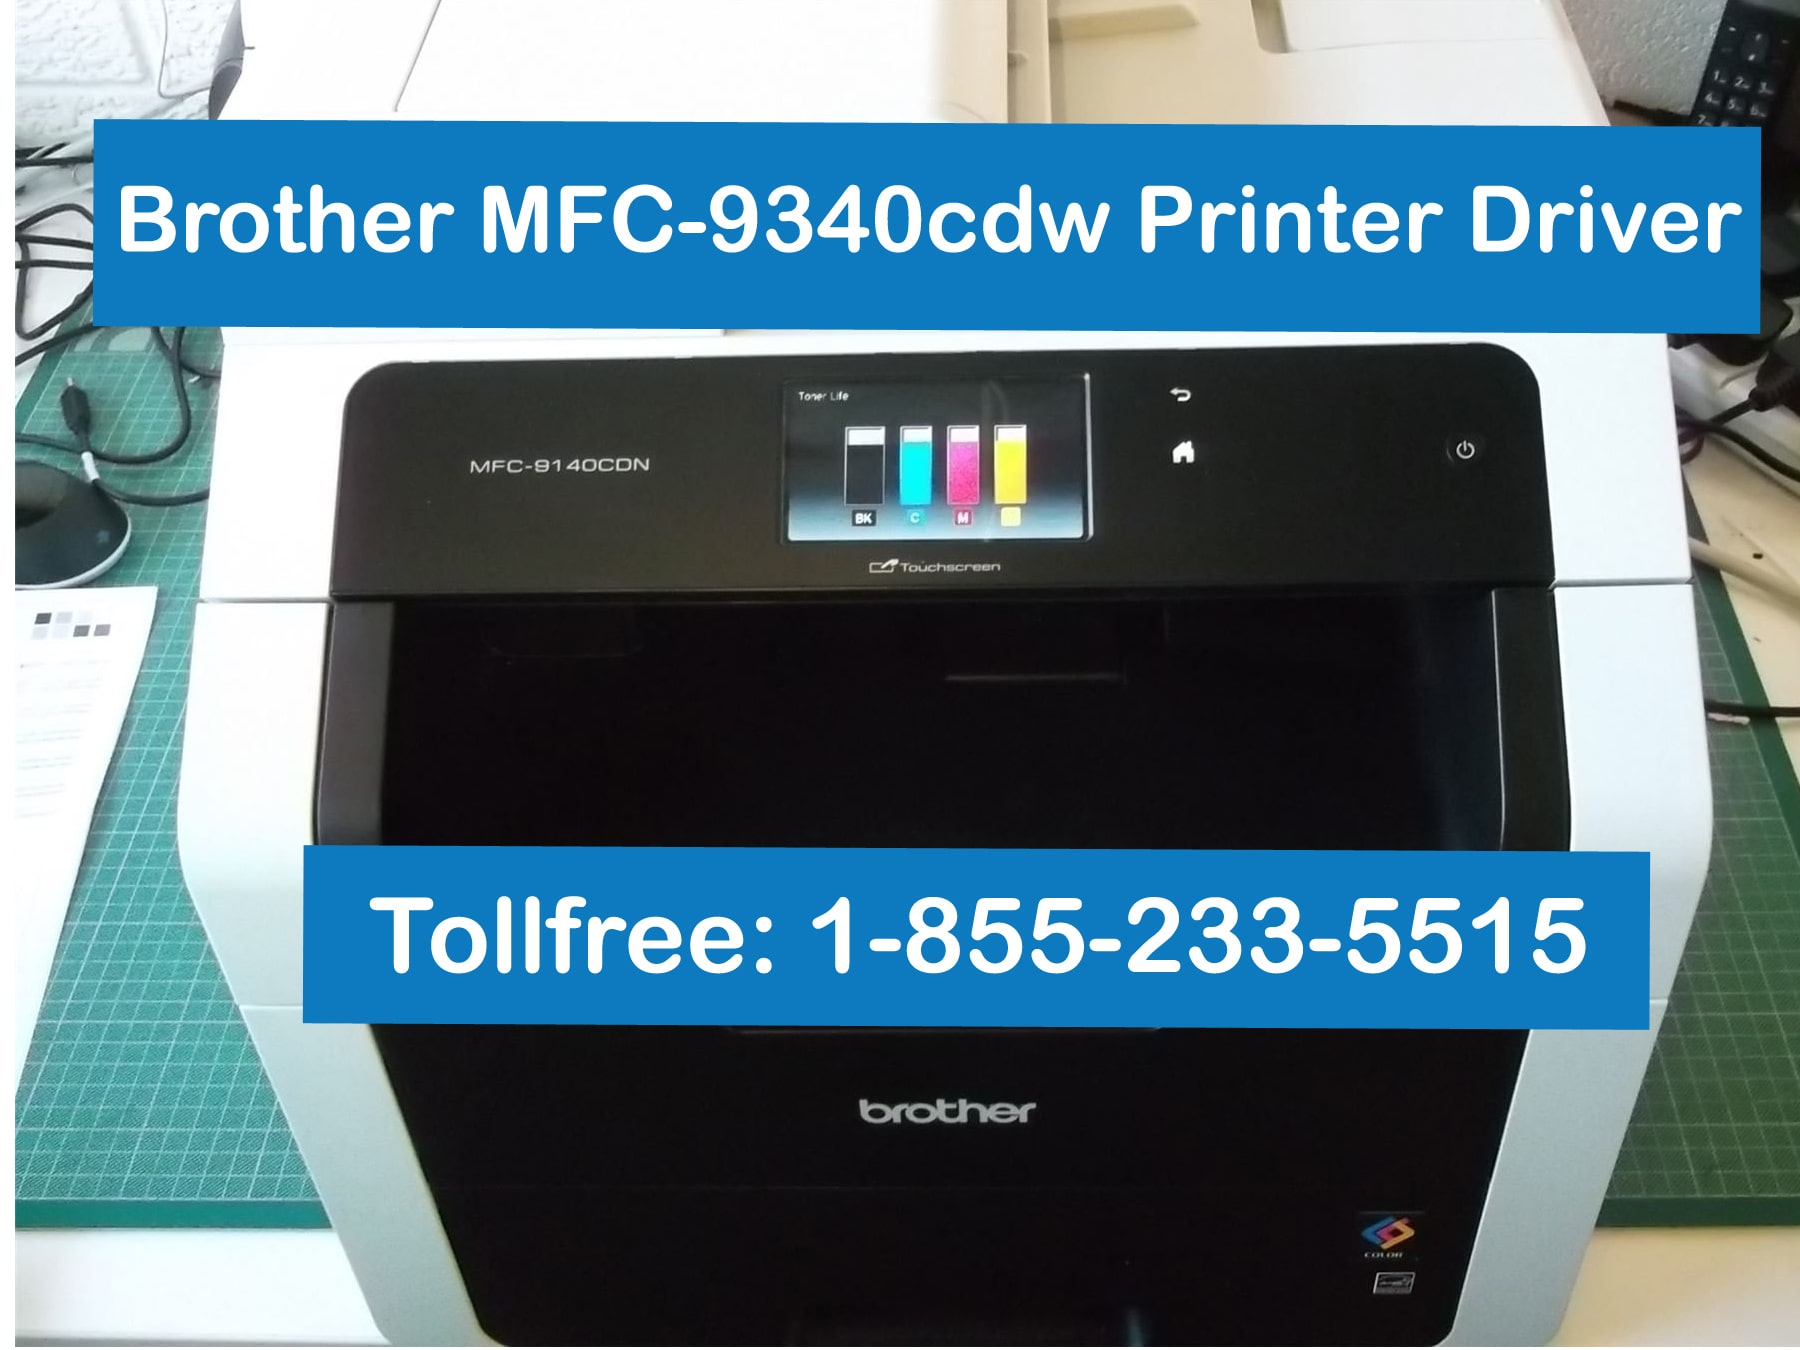 Brother MFC-9340cdw Printer Driver